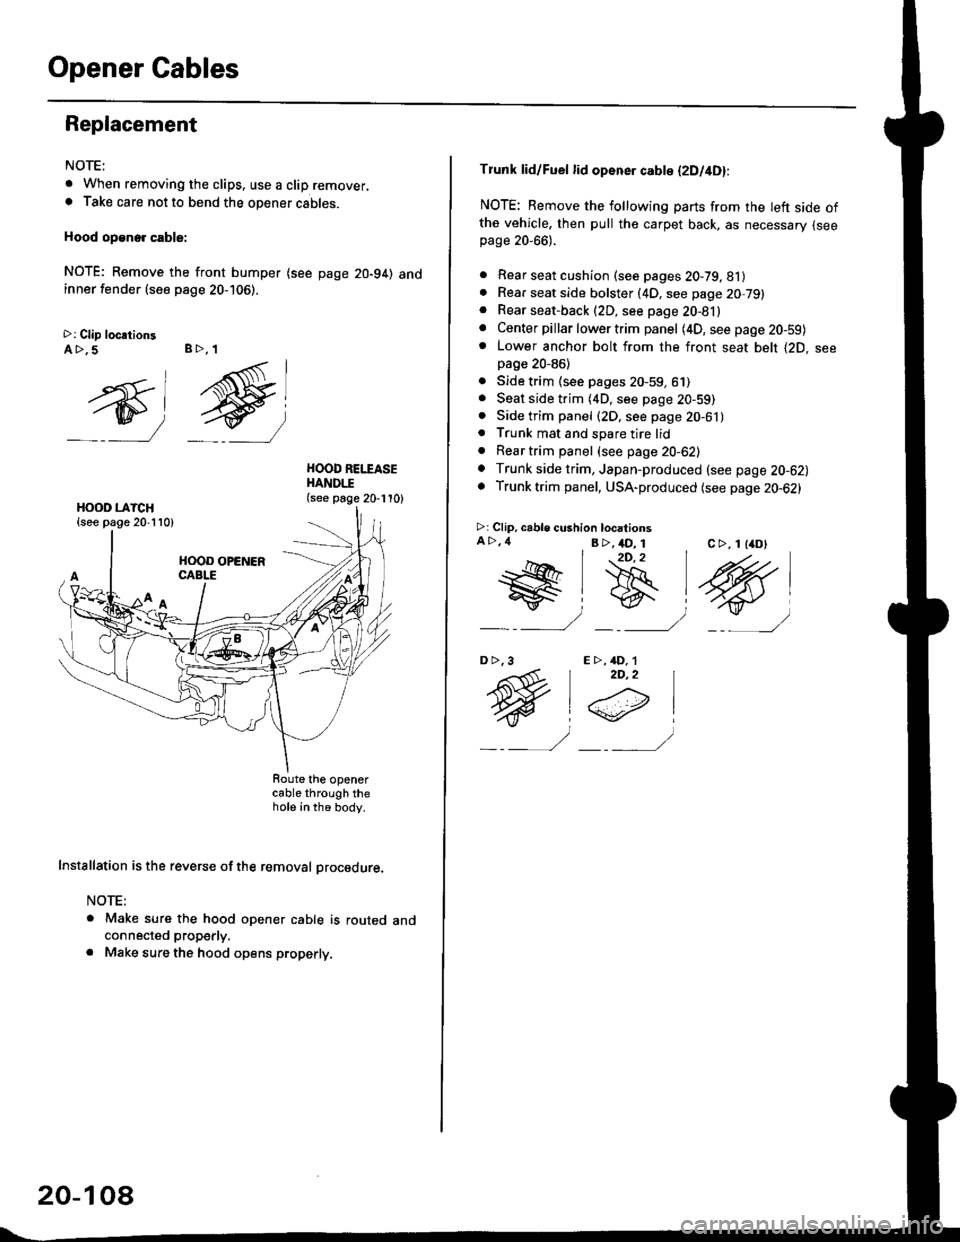 HONDA CIVIC 1997 6.G Workshop Manual Opener Cables
Replacement
NOTE:
t When removing the clips. use a clip remover.. Take care not to bend the opener cables.
Hood op€ne. cable:
NOTE; Remove the front bumper (see page 20-94) andinner fe